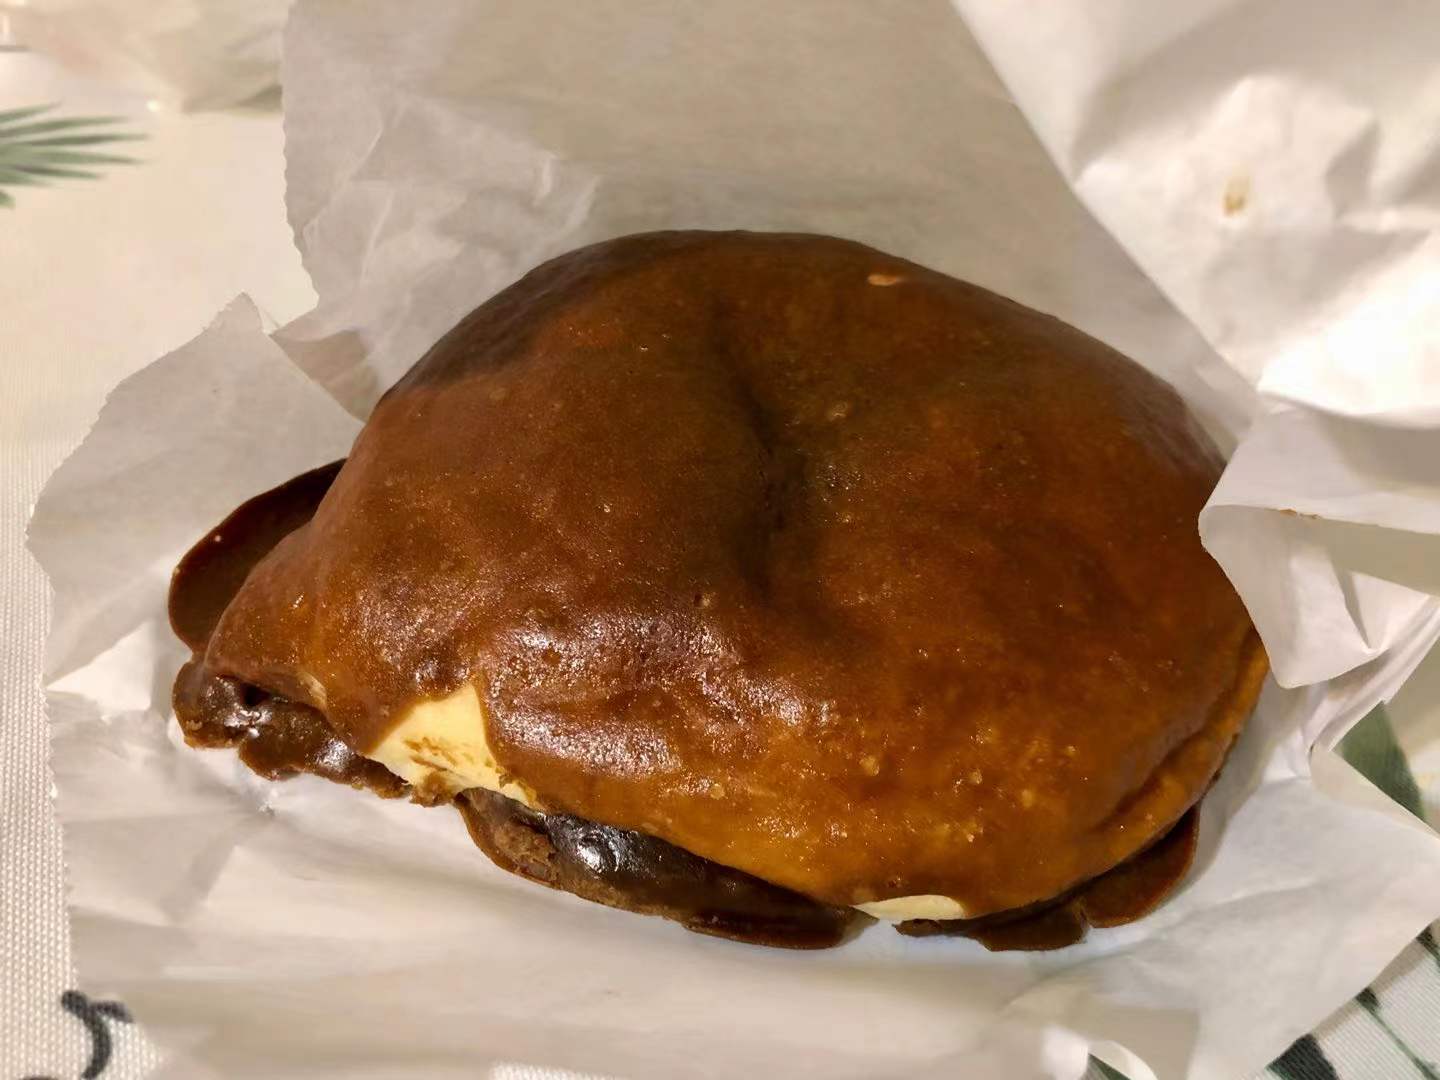 On parchment paper, there is a papparoti coffee bun with a dark brown exterior. Photo by Xiaohui Zhang.